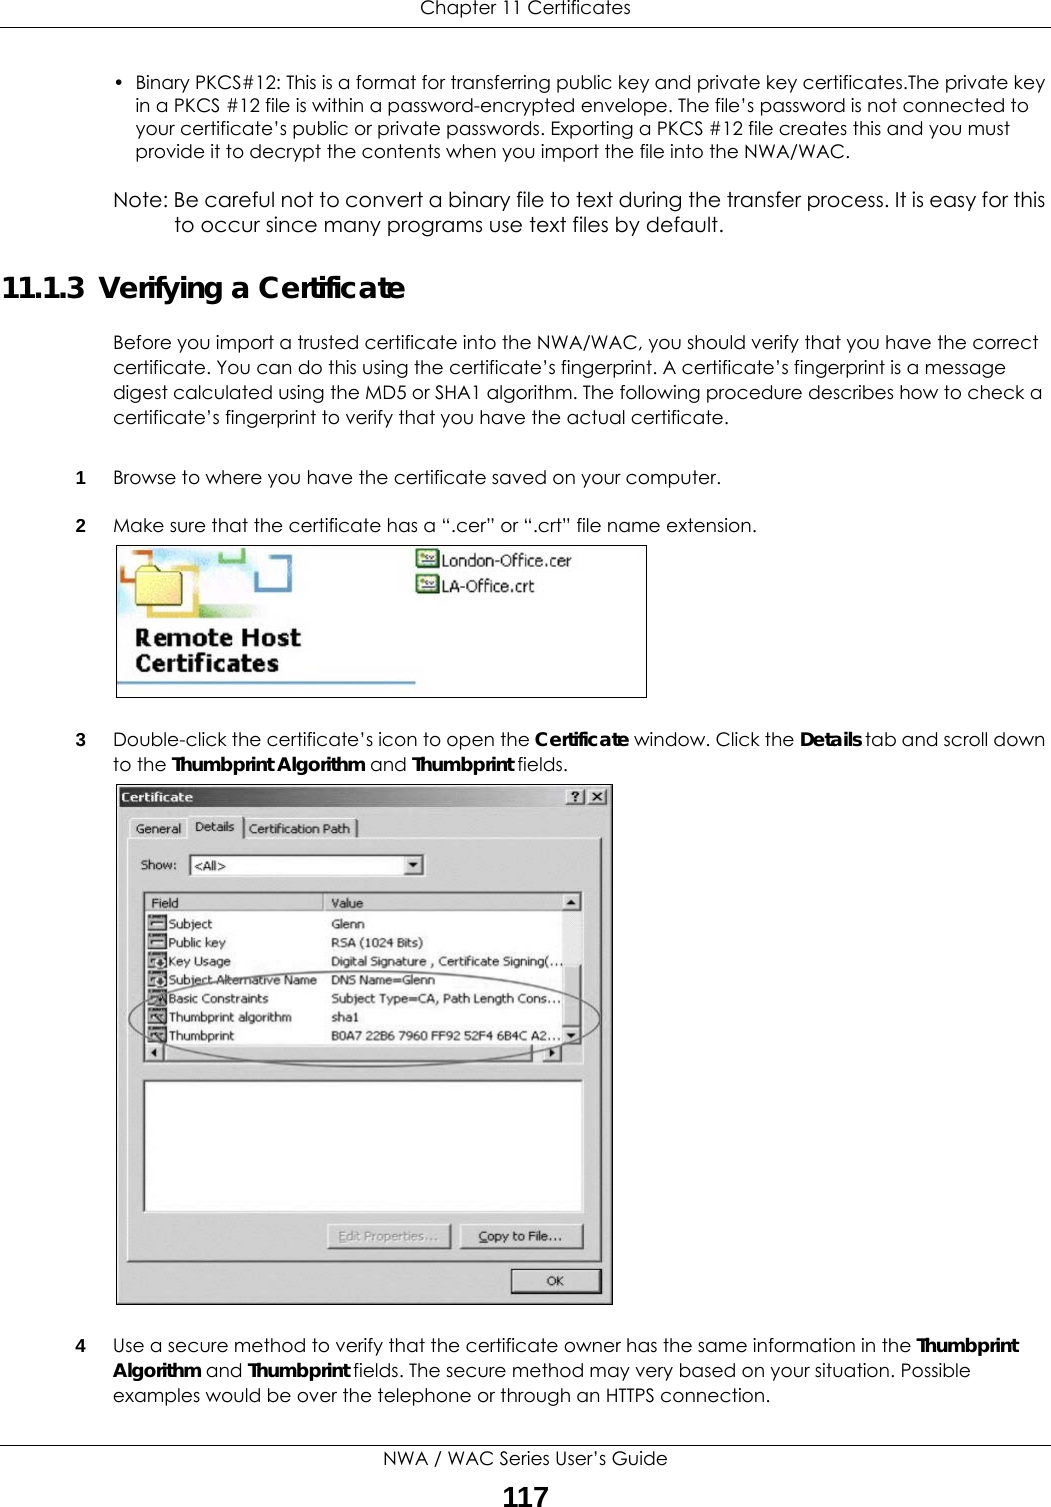 Chapter 11 CertificatesNWA / WAC Series User’s Guide117• Binary PKCS#12: This is a format for transferring public key and private key certificates.The private key in a PKCS #12 file is within a password-encrypted envelope. The file’s password is not connected to your certificate’s public or private passwords. Exporting a PKCS #12 file creates this and you must provide it to decrypt the contents when you import the file into the NWA/WAC. Note: Be careful not to convert a binary file to text during the transfer process. It is easy for this to occur since many programs use text files by default. 11.1.3  Verifying a CertificateBefore you import a trusted certificate into the NWA/WAC, you should verify that you have the correct certificate. You can do this using the certificate’s fingerprint. A certificate’s fingerprint is a message digest calculated using the MD5 or SHA1 algorithm. The following procedure describes how to check a certificate’s fingerprint to verify that you have the actual certificate. 1Browse to where you have the certificate saved on your computer. 2Make sure that the certificate has a “.cer” or “.crt” file name extension.3Double-click the certificate’s icon to open the Certificate window. Click the Details tab and scroll down to the Thumbprint Algorithm and Thumbprint fields. 4Use a secure method to verify that the certificate owner has the same information in the Thumbprint Algorithm and Thumbprint fields. The secure method may very based on your situation. Possible examples would be over the telephone or through an HTTPS connection. 